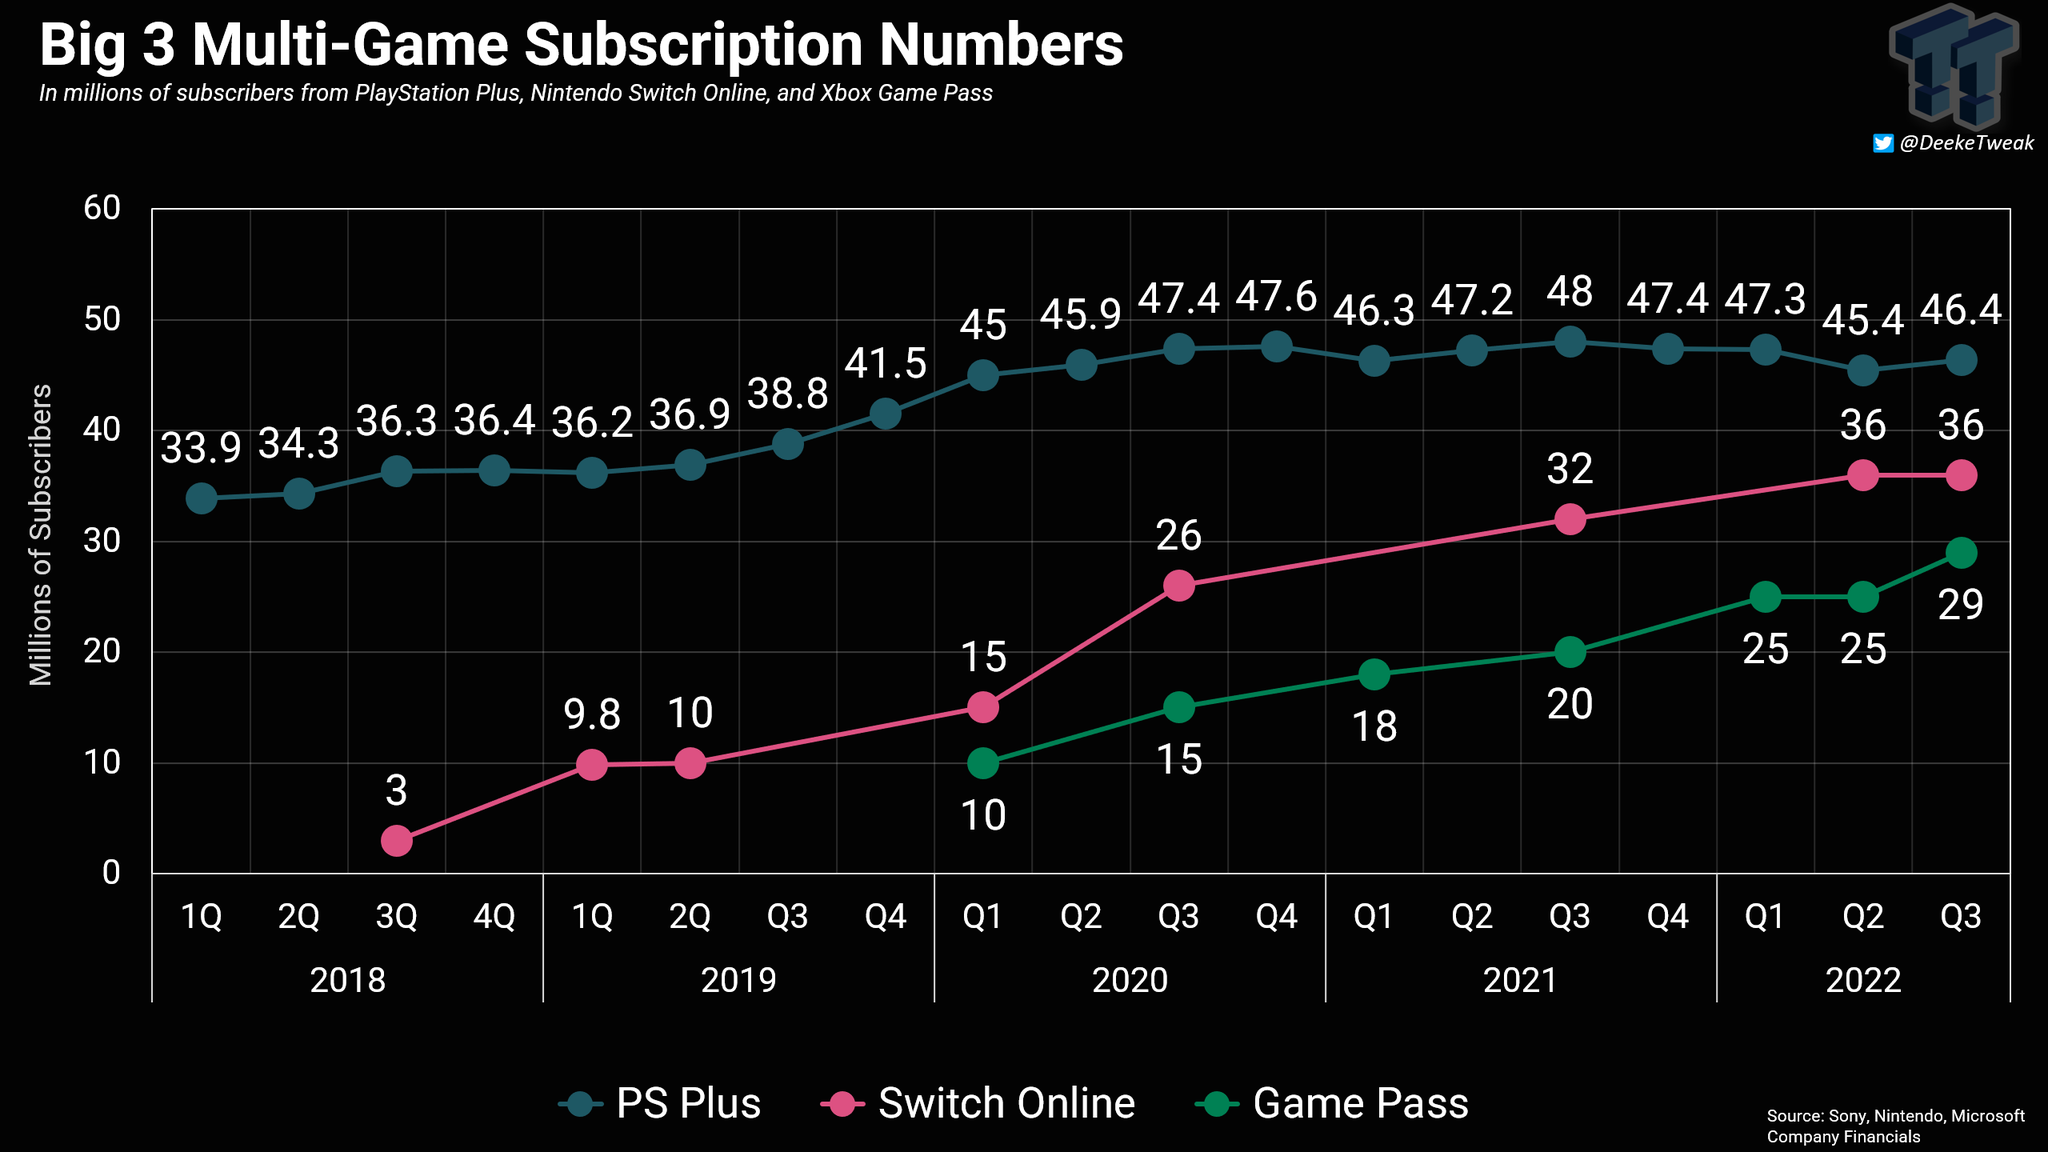 Derek Strickland on X: Sony's PlayStation Plus pricing model took this  marketing logic to the next level with its monthly, quarterly, and annual  plans.  / X